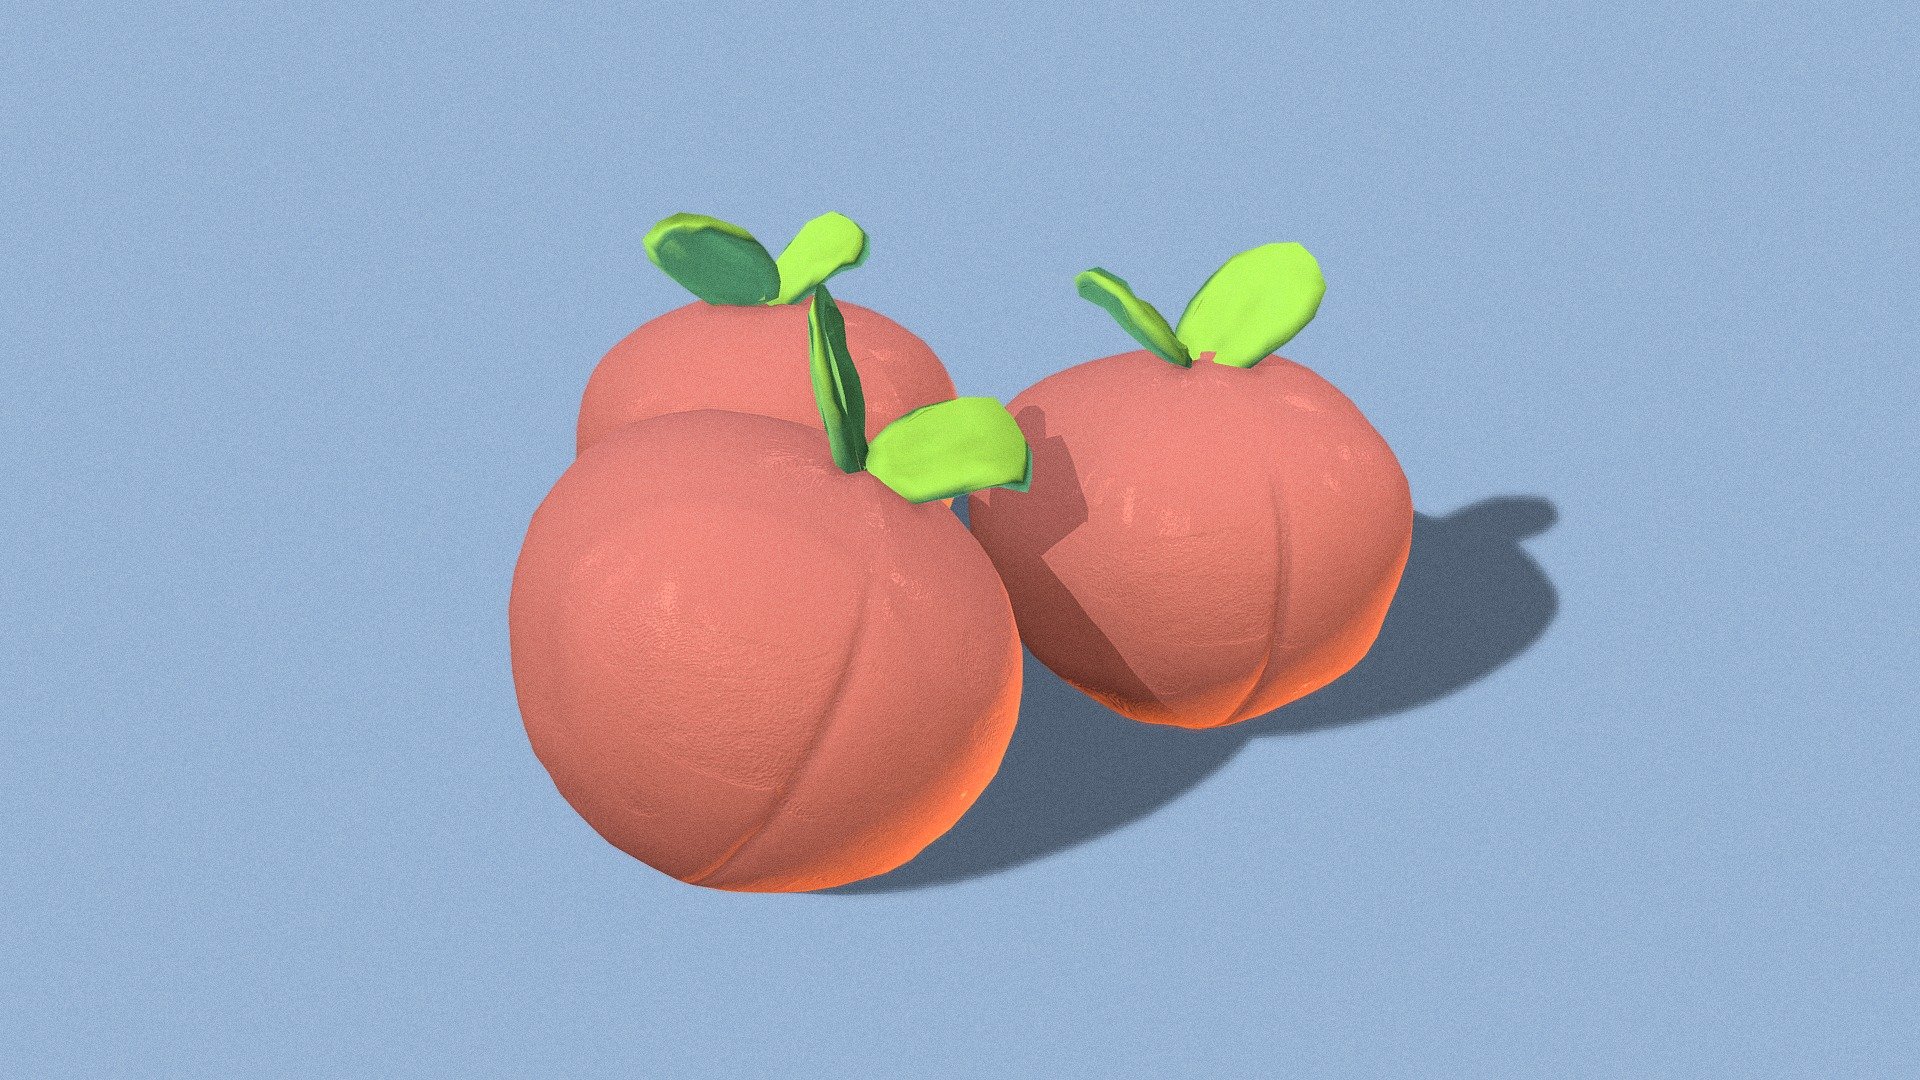 This peach was created and textured in Blender. I was following southernshotty's tutorial on how to create procedual clay texture. If you wan to see the full process check out my [artstation]https://www.artstation.com/artwork/GX3BP3

This model is free to download ust pls credit - Peach - Download Free 3D model by Elonova (@genovaeloi) 3d model